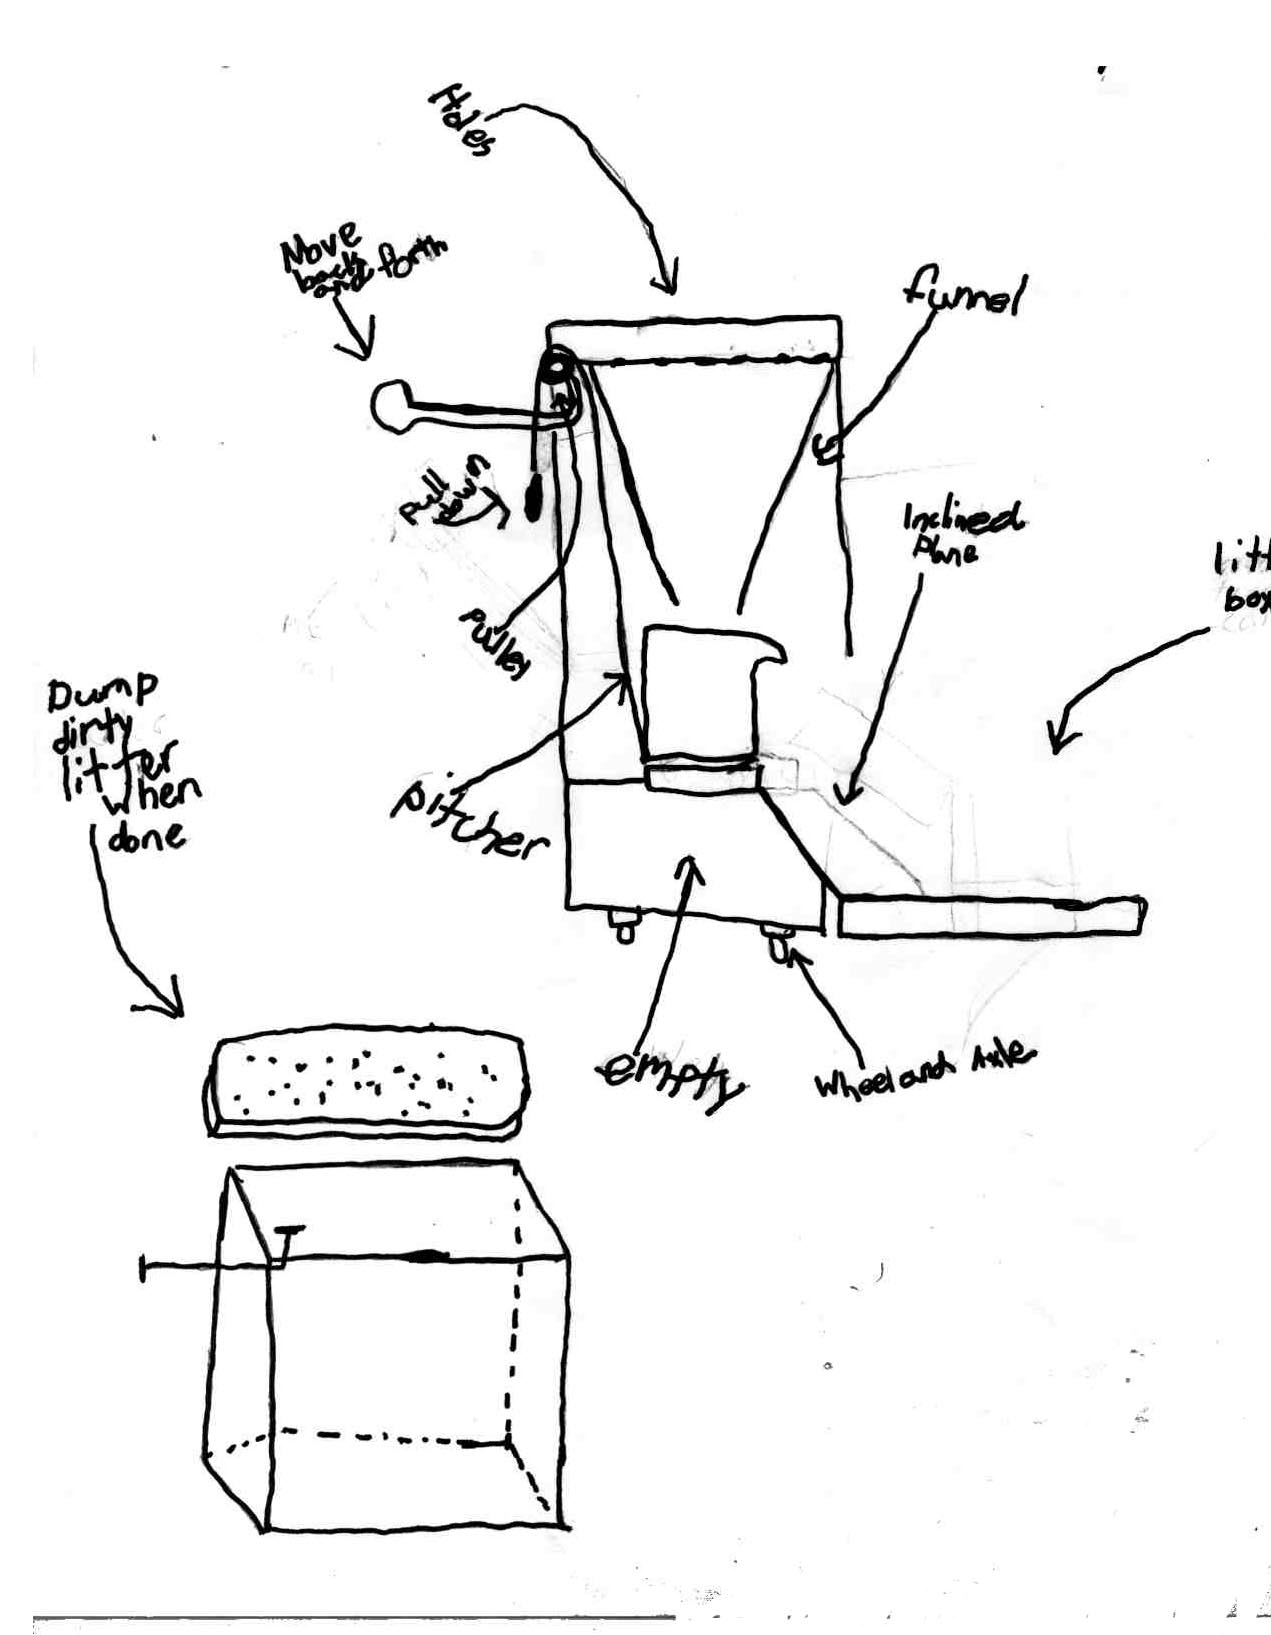 Nowell's technical drawing of his invention, the Litter Sifter